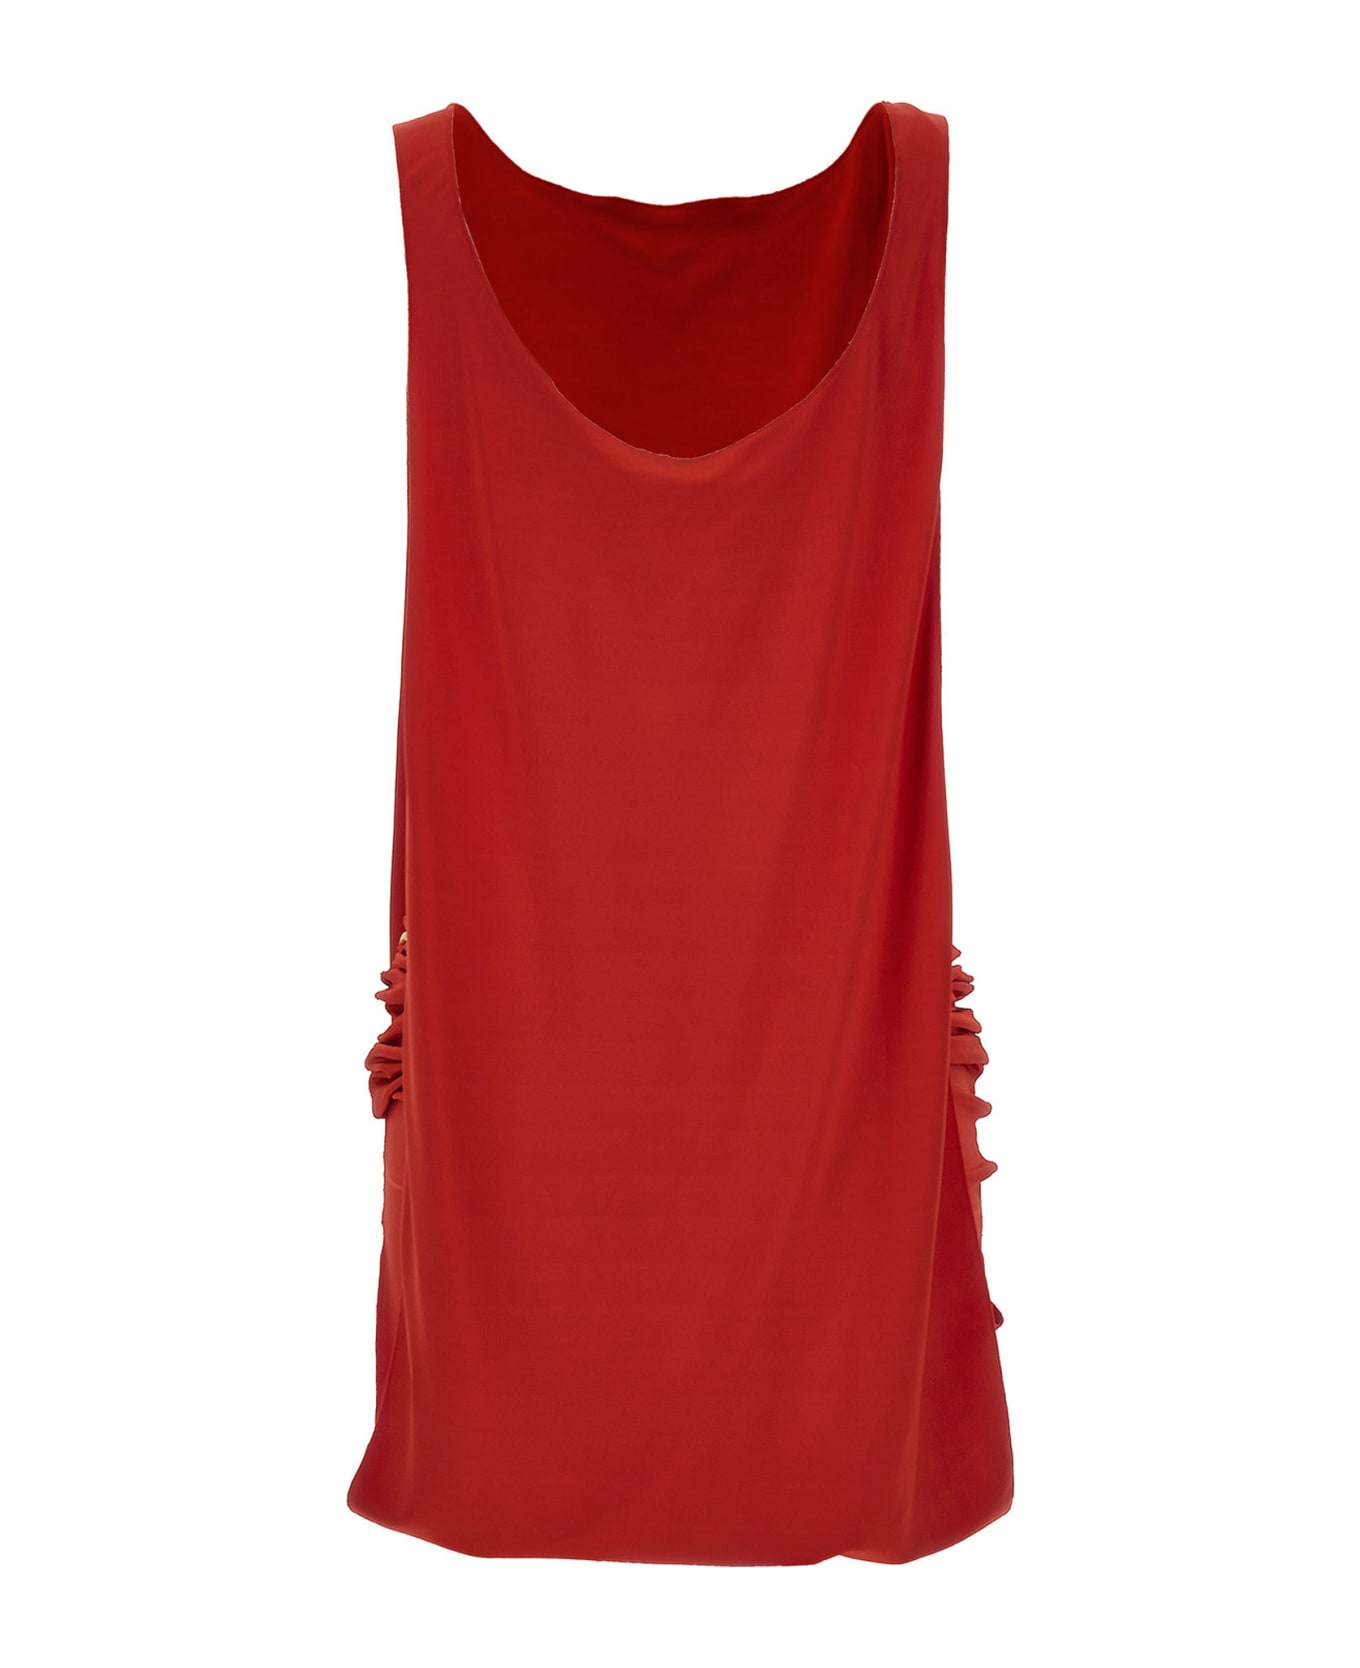 Marni Dress With Side Slits - Red